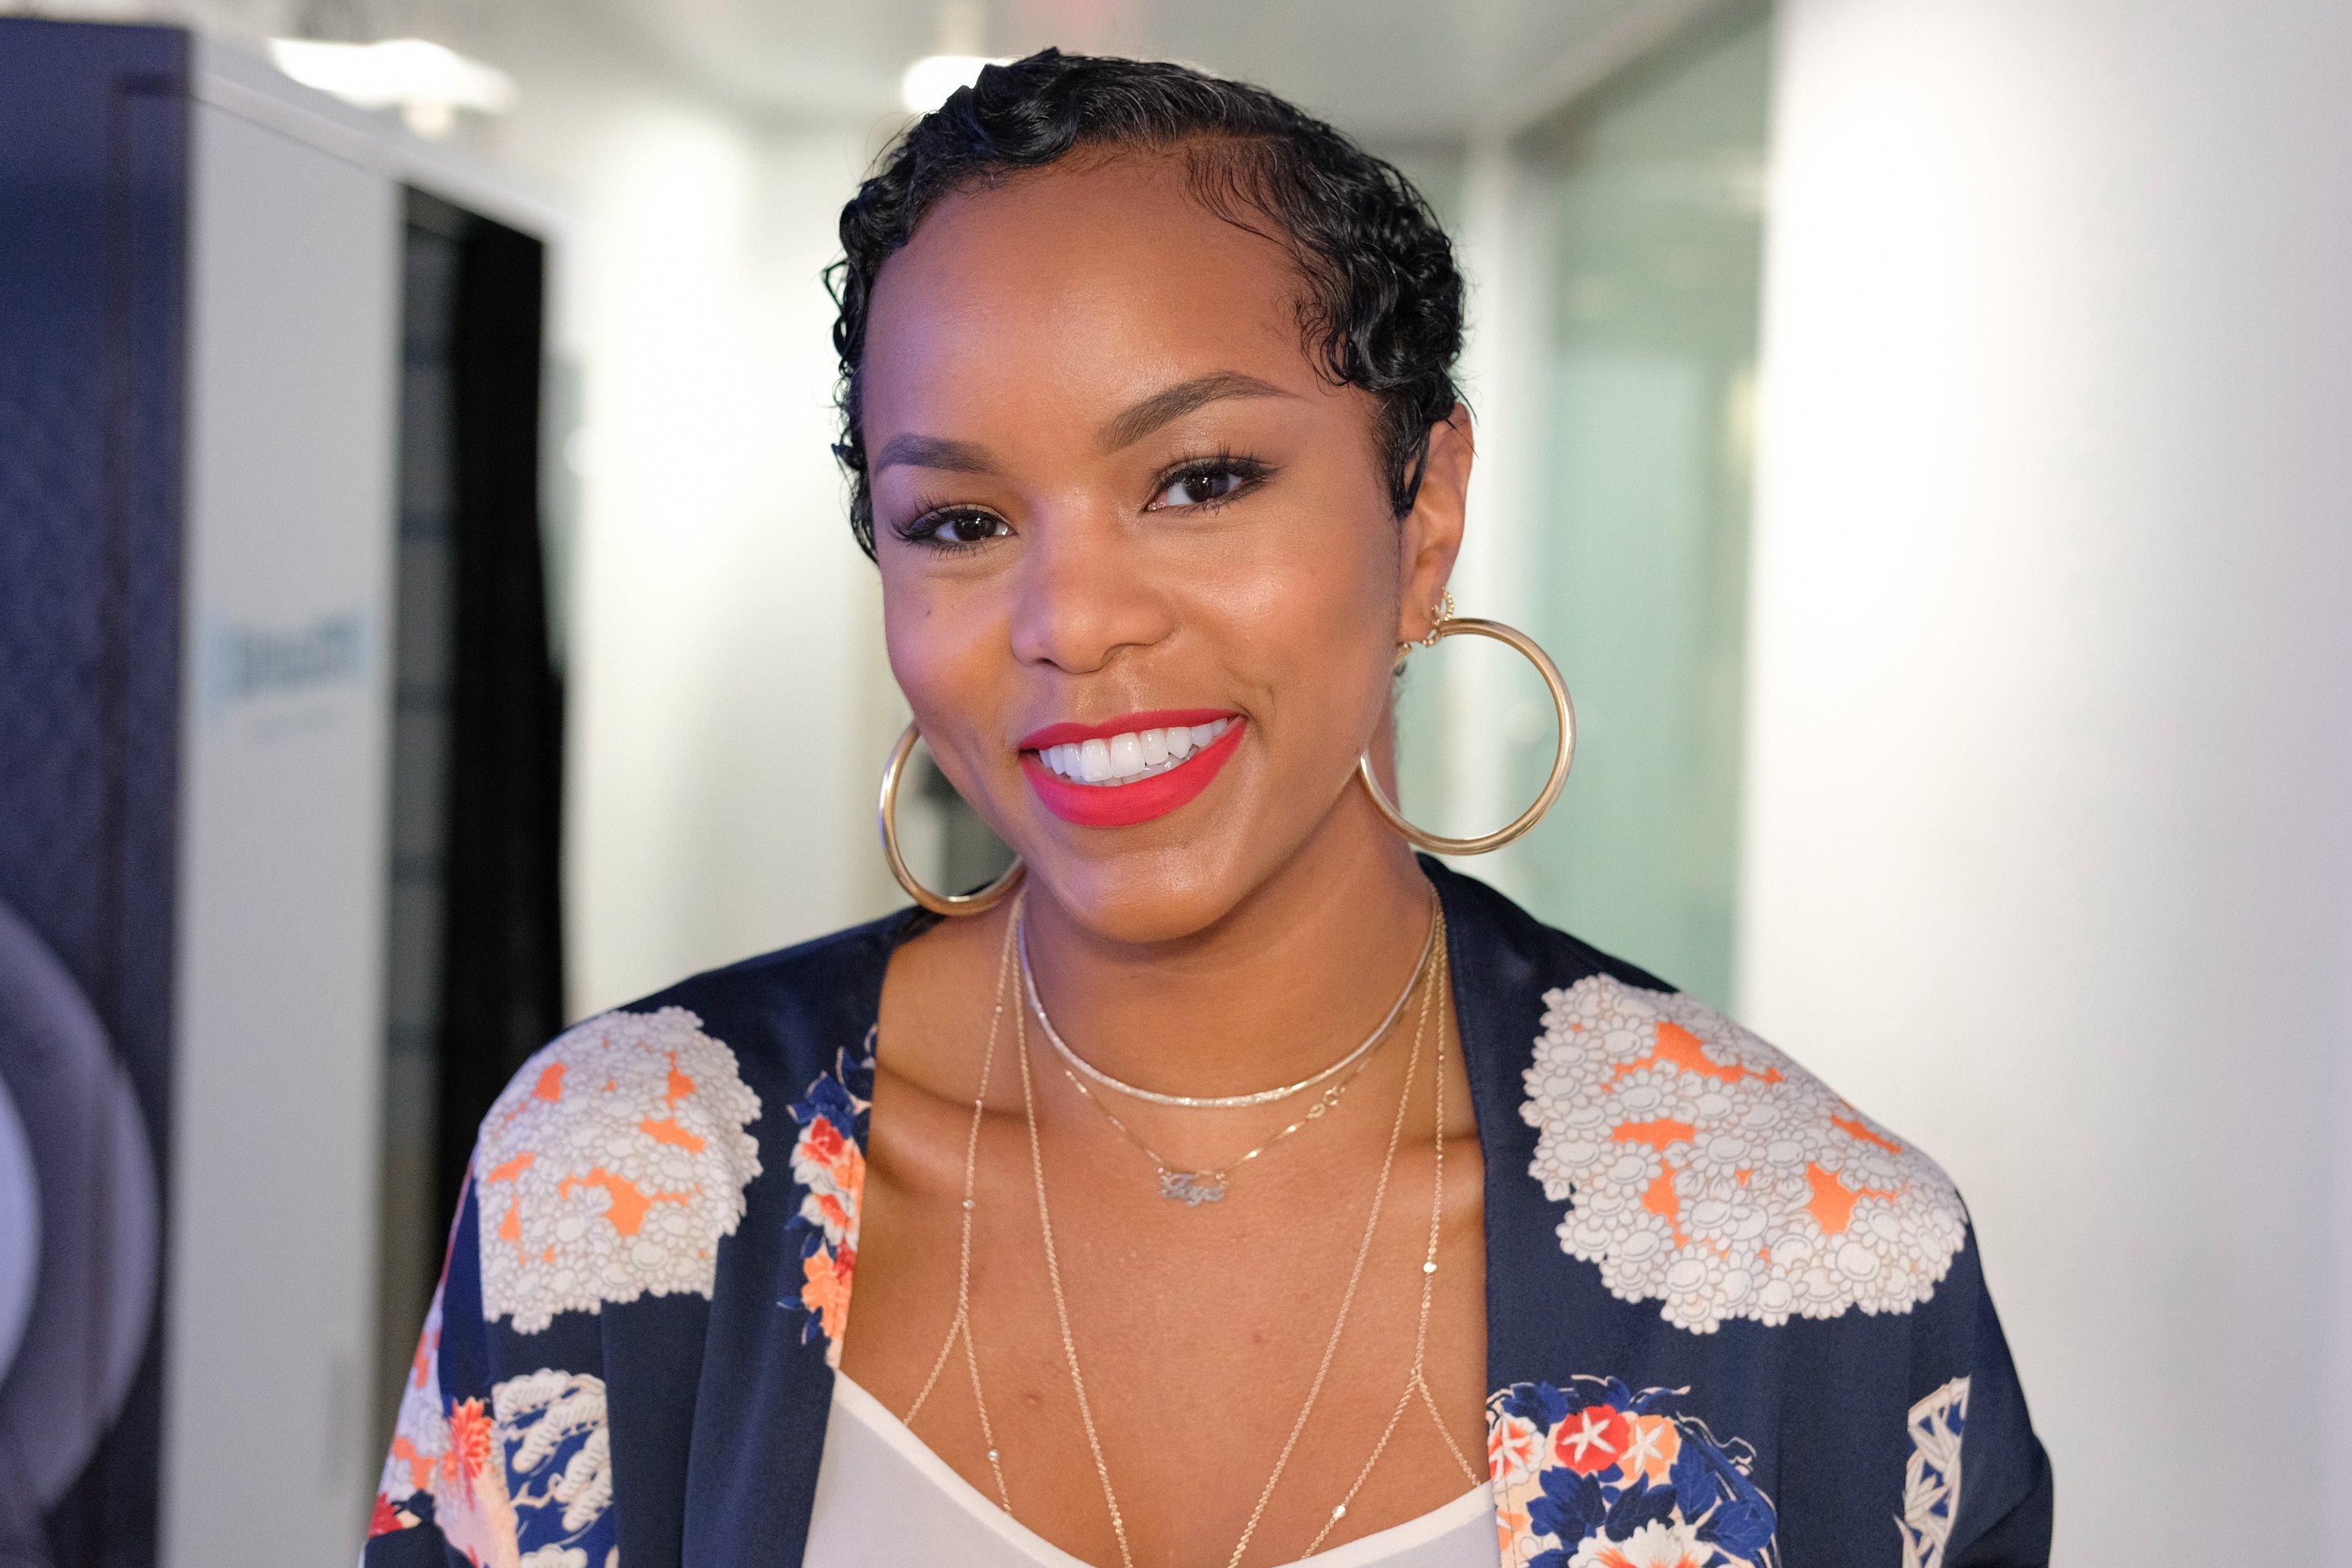 LeToya Luckett visits SiriusXM Studios on April 19, 2017 in New York City | Photo: GettyImages